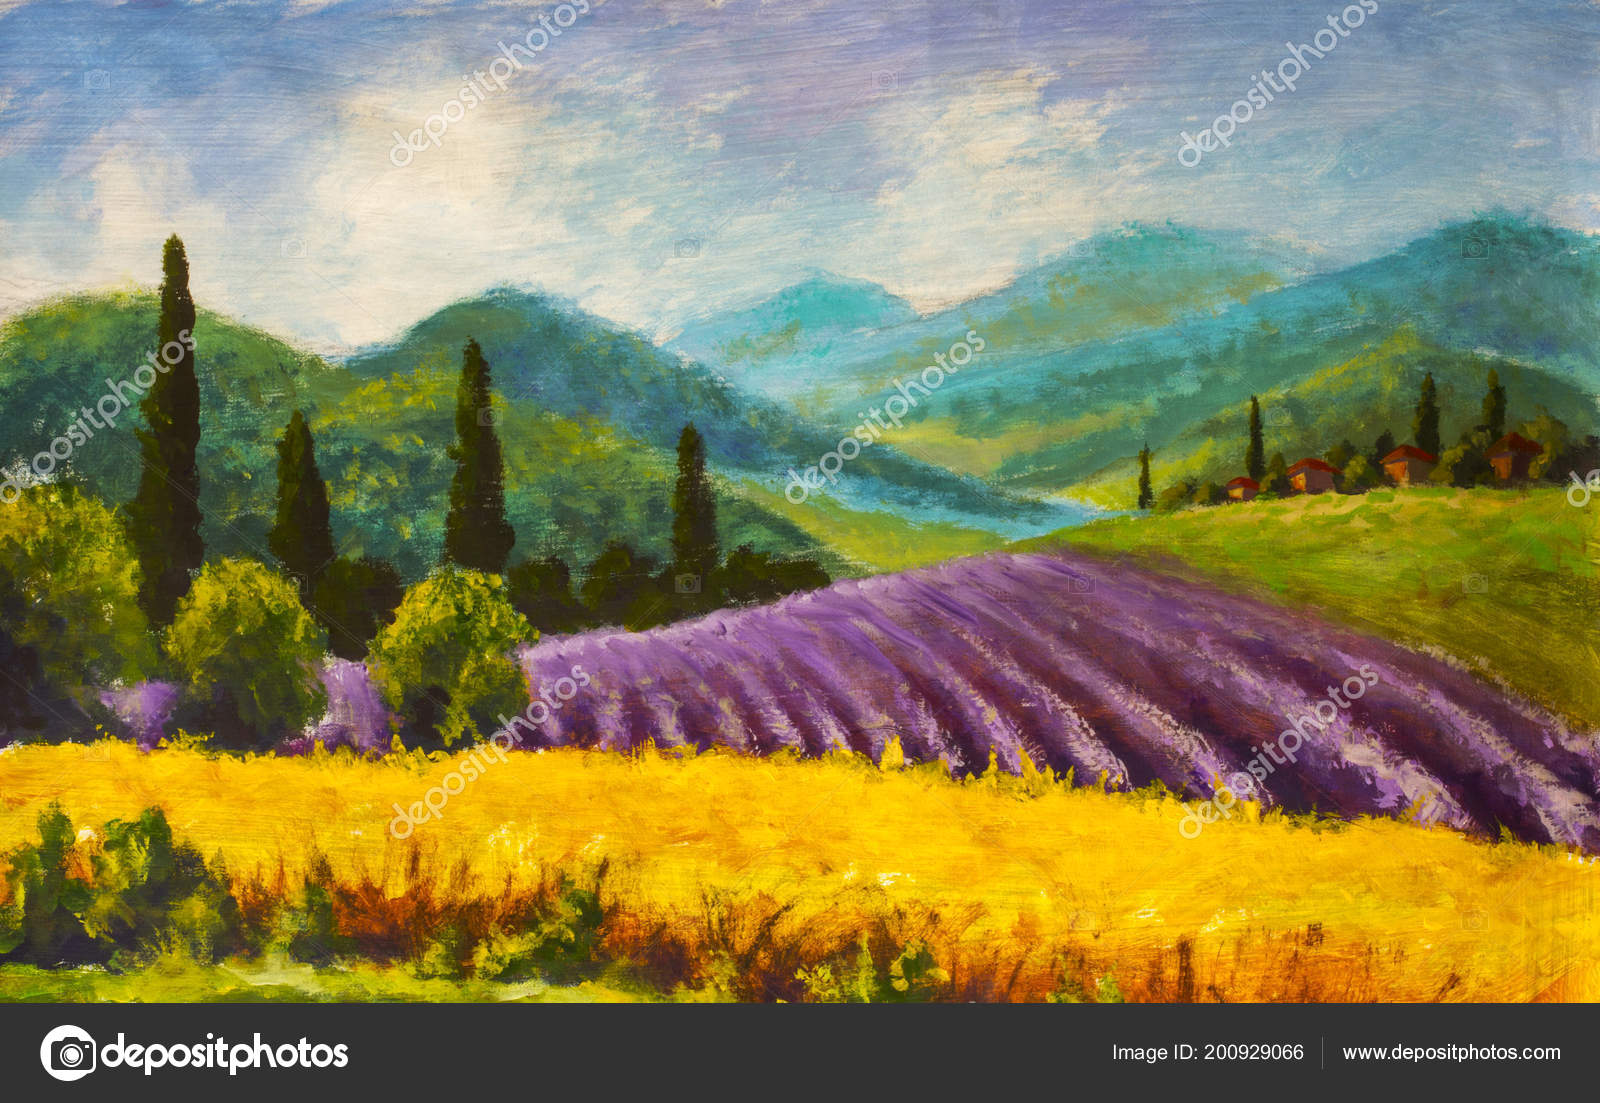 Lavender Field Painting Original Art Tuscany Landscape Wall Art Italy Rural Floral Small Impasto Oil Painting Farm Artwork 5 by 8 by Olkosi